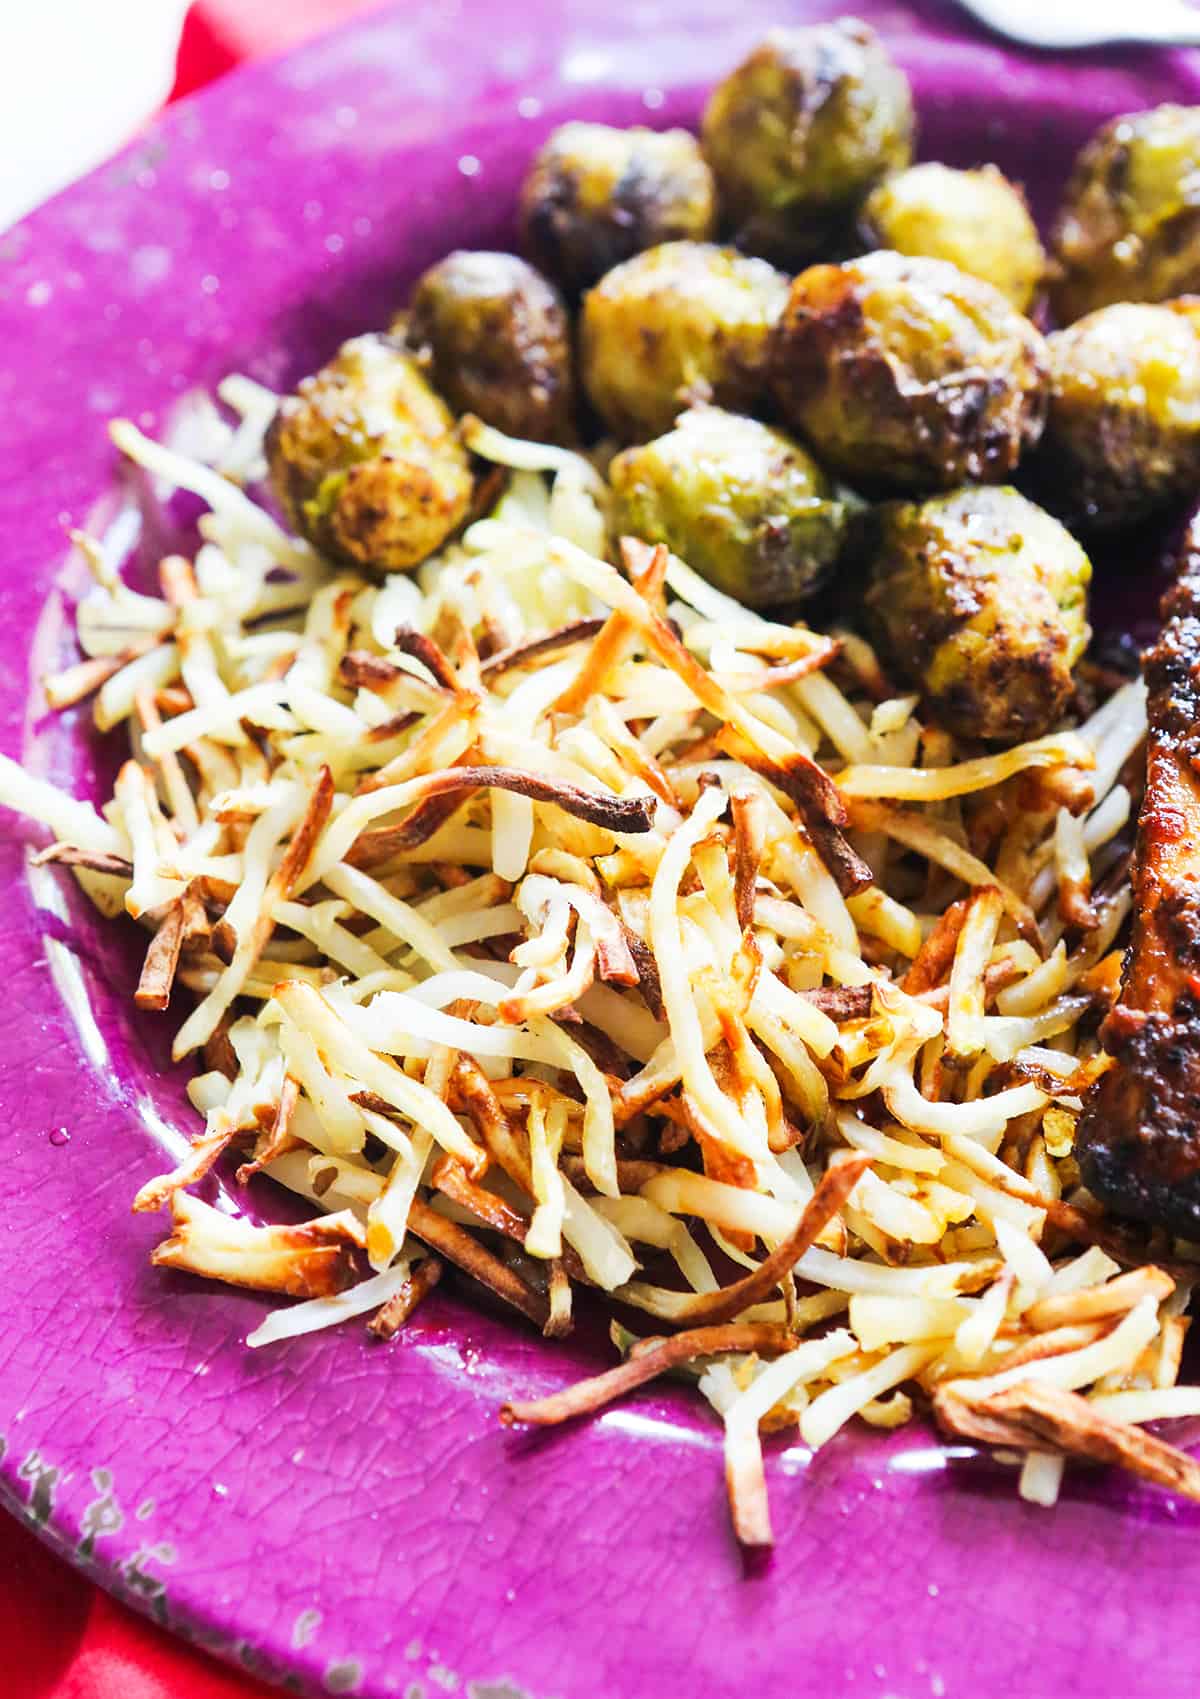 Serving of hash browns next to brussels sprouts on a plate.